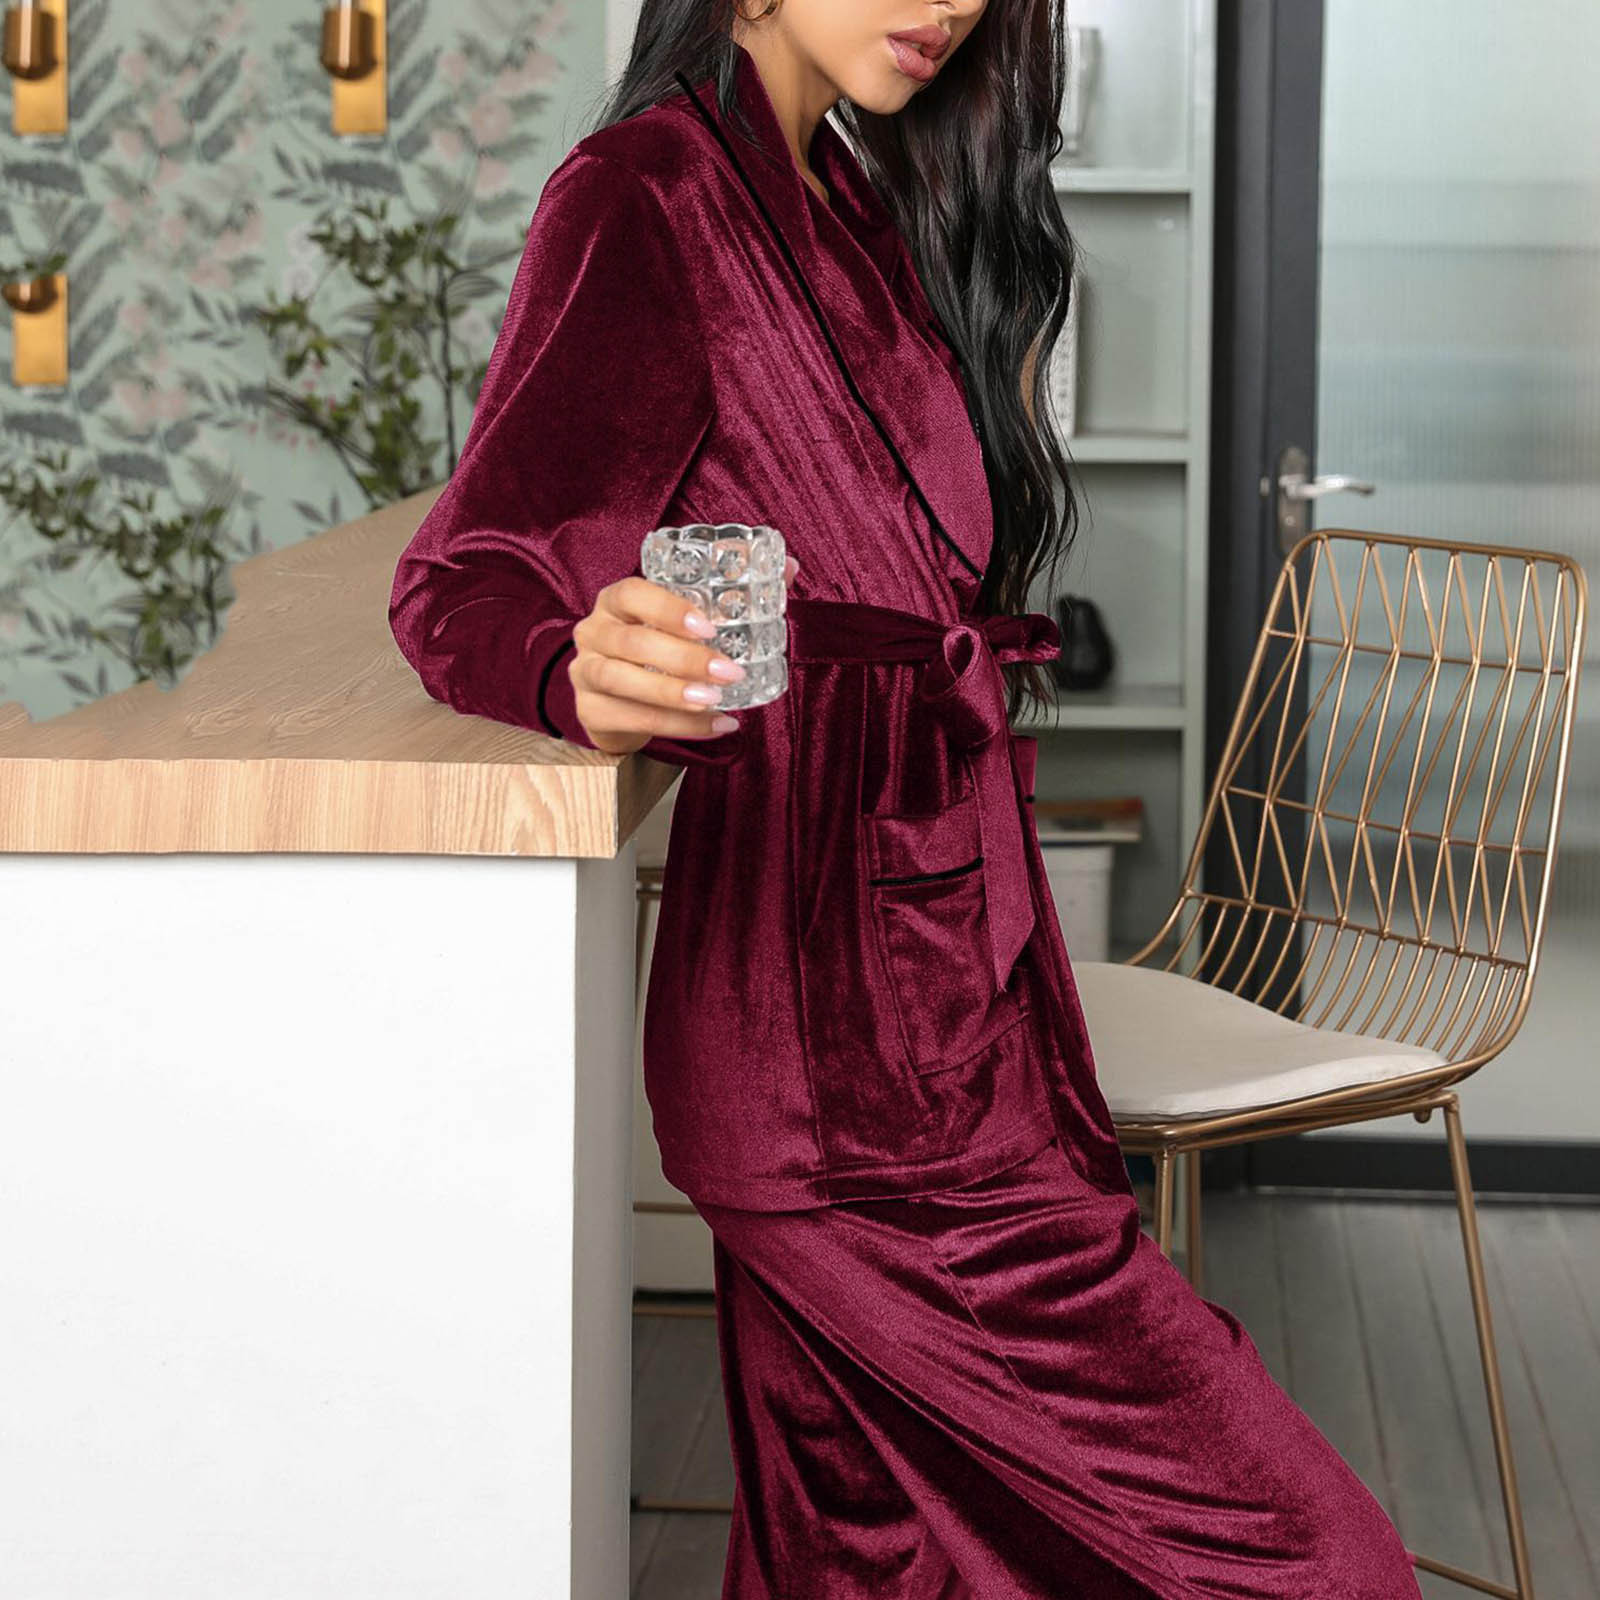 Velour Pjs for Women Sets,Ladies Velvet Pyjama Set Two Pieces Long Sleeve Casual V Neck Wrap Sweatshirt and Lounge Bottoms Nightwear Loungwear Autumn Winter Pajama Sets Sale Clearance - image 4 of 5